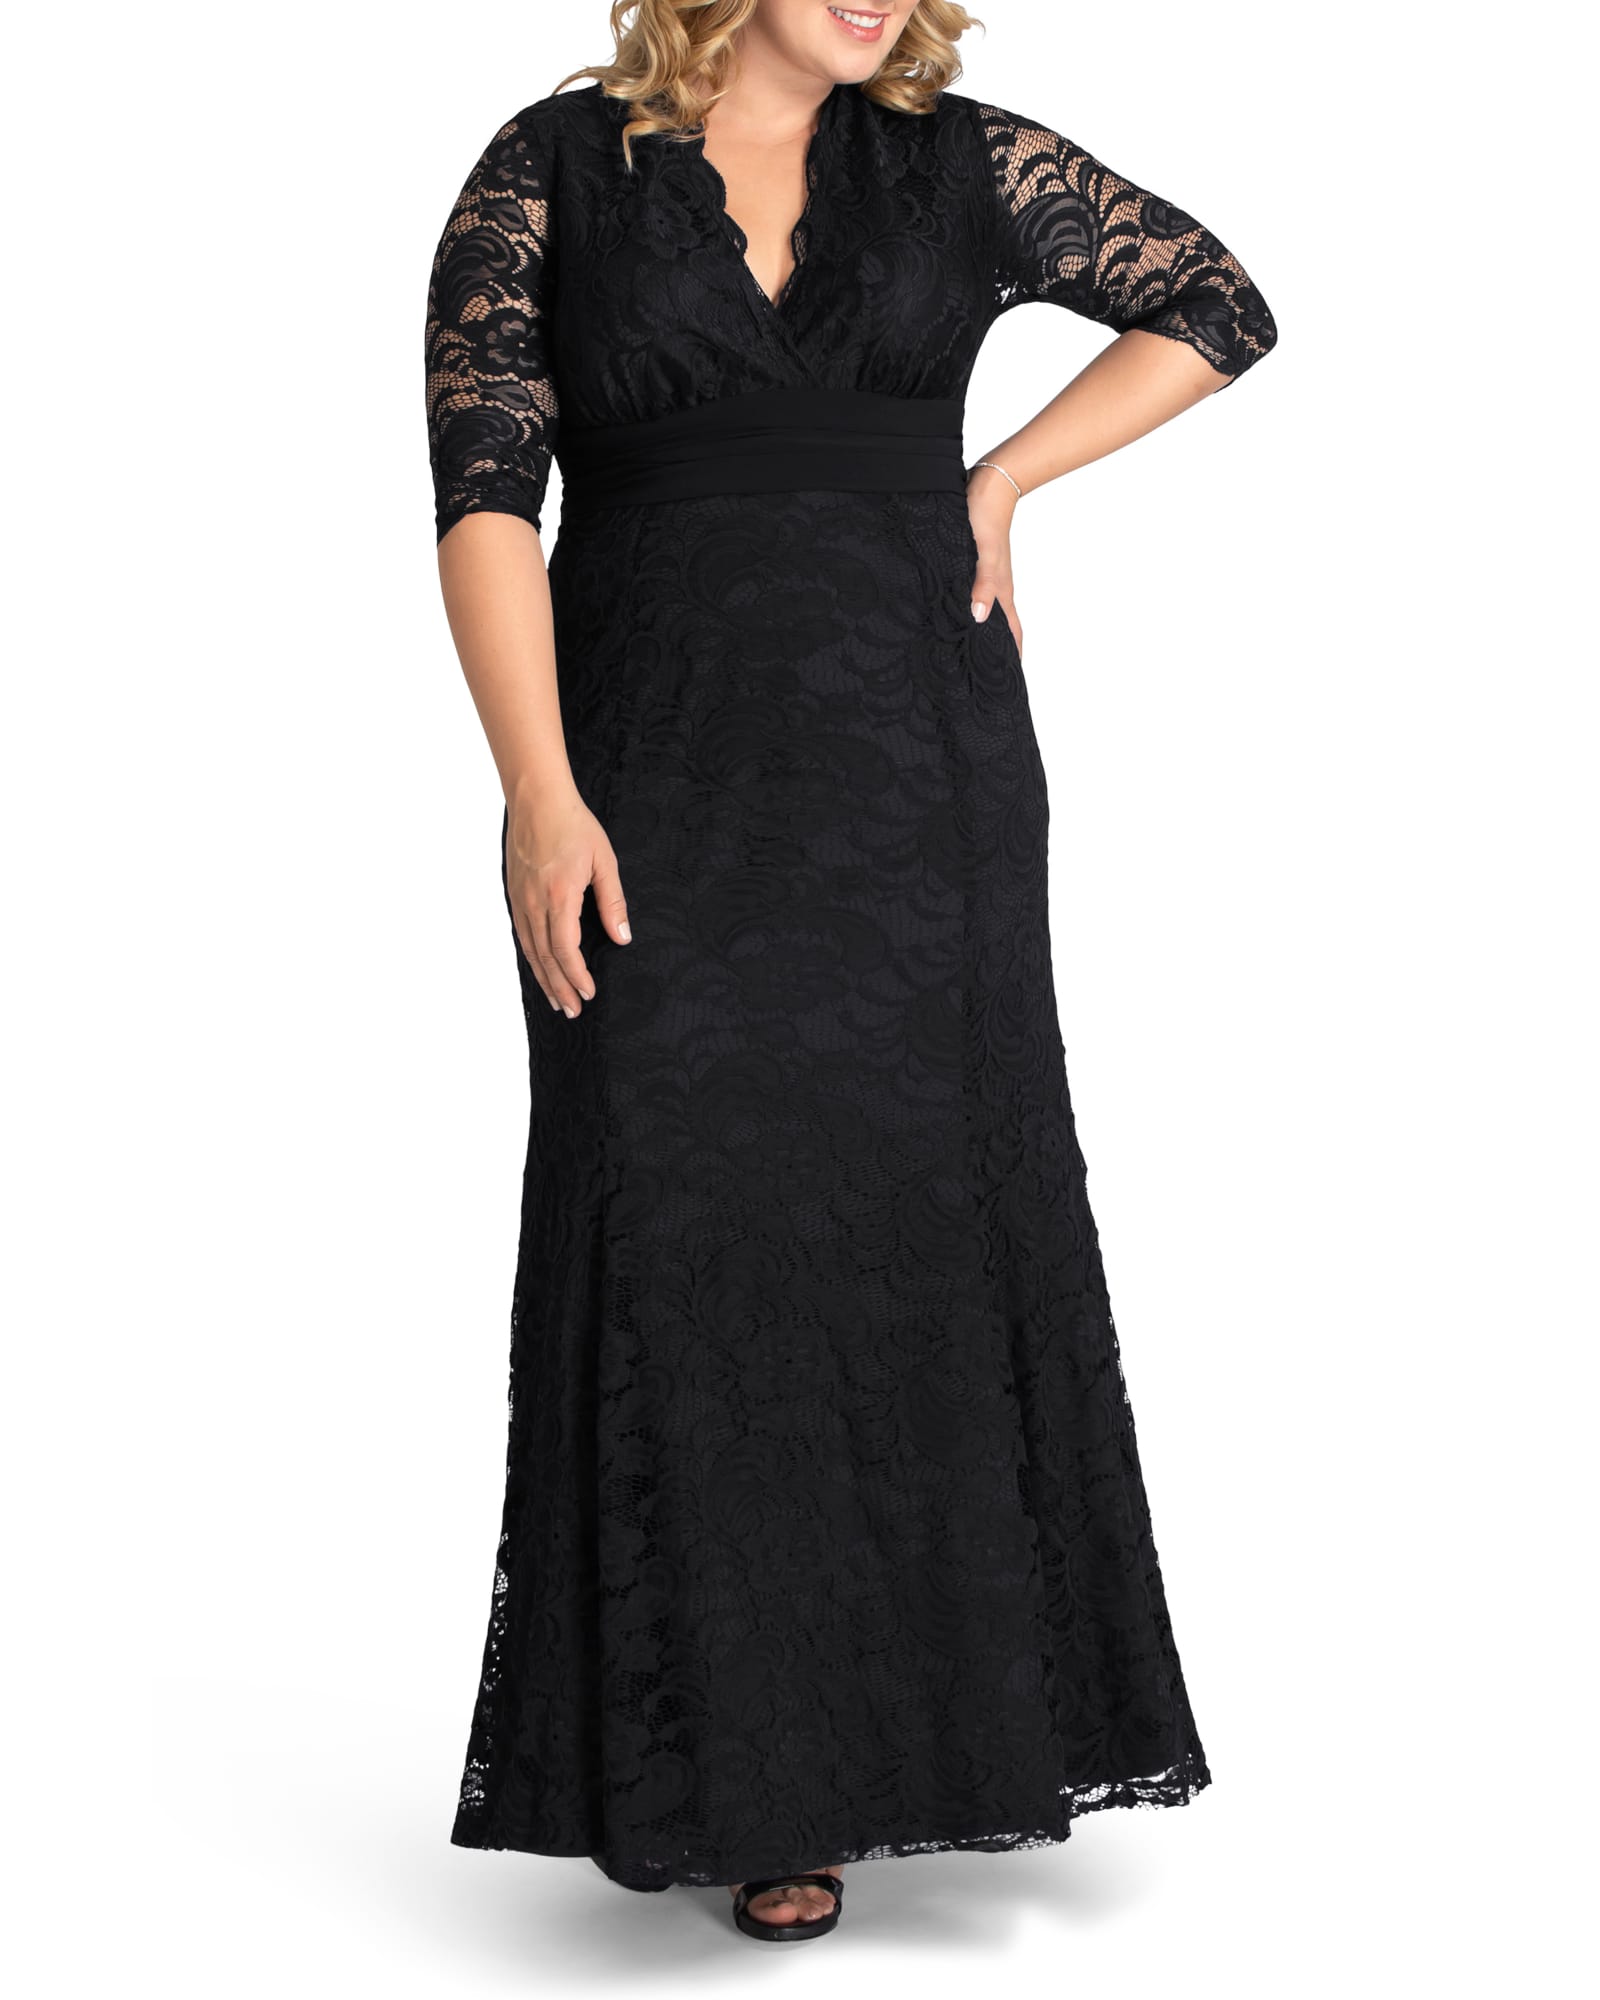 Screen Siren Lace Evening Gown | ONYX